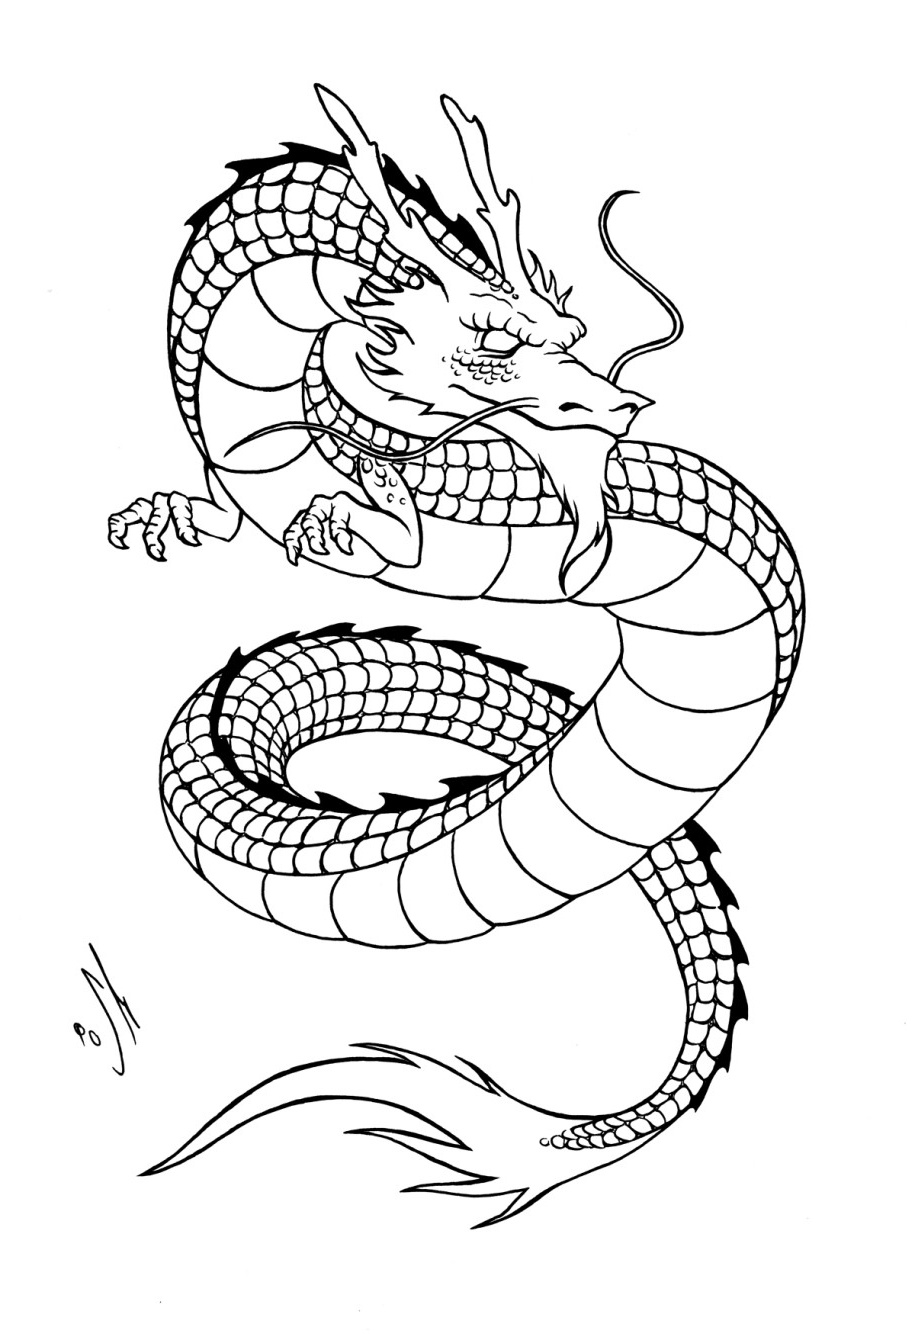 image=chine asie coloriage adulte dragon chinois simple 1